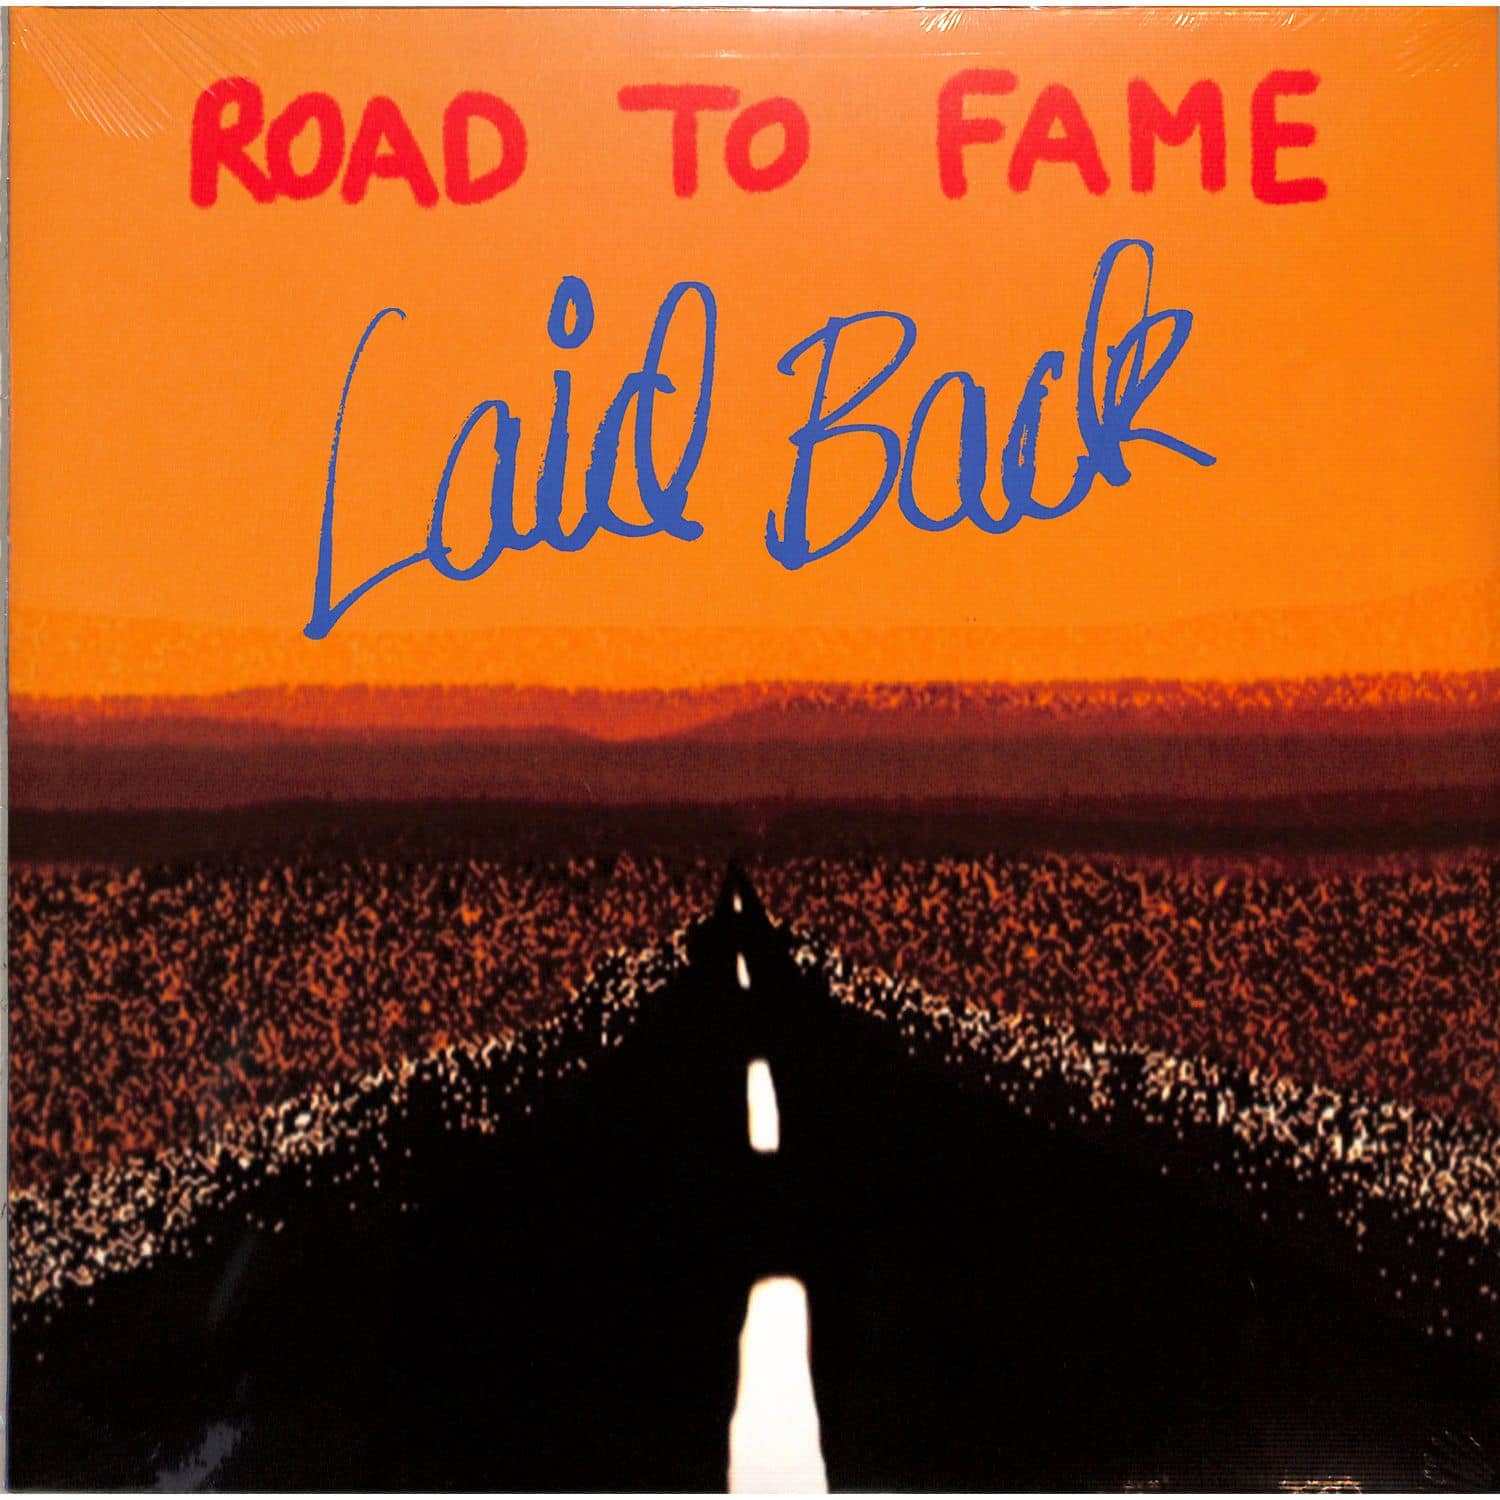 Laid Back - ROAD TO FAME 